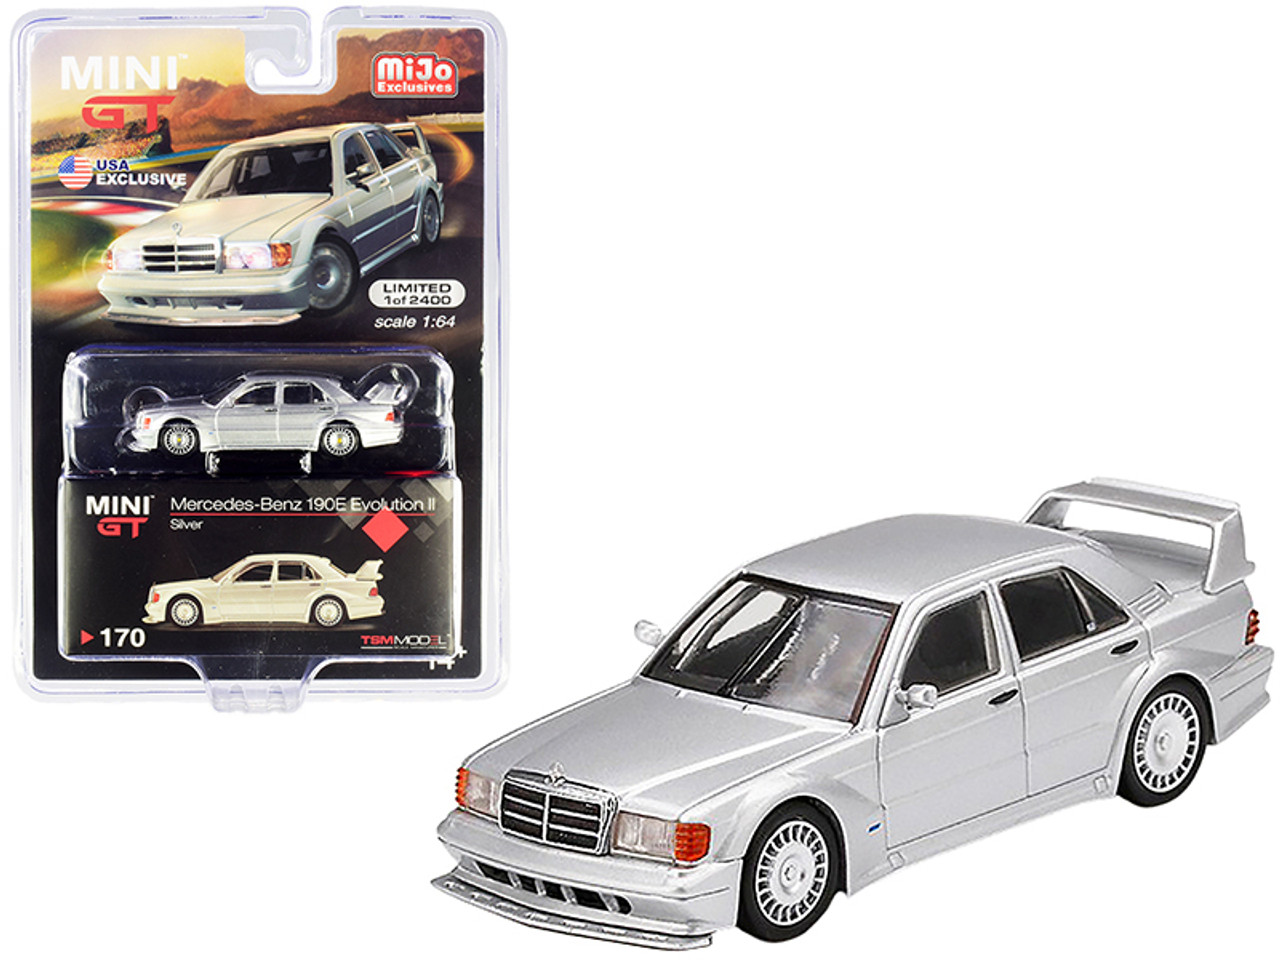 Mercedes Benz 190E Evolution II Silver Limited Edition to 2400 pieces Worldwide 1/64 Diecast Model Car by True Scale Miniatures